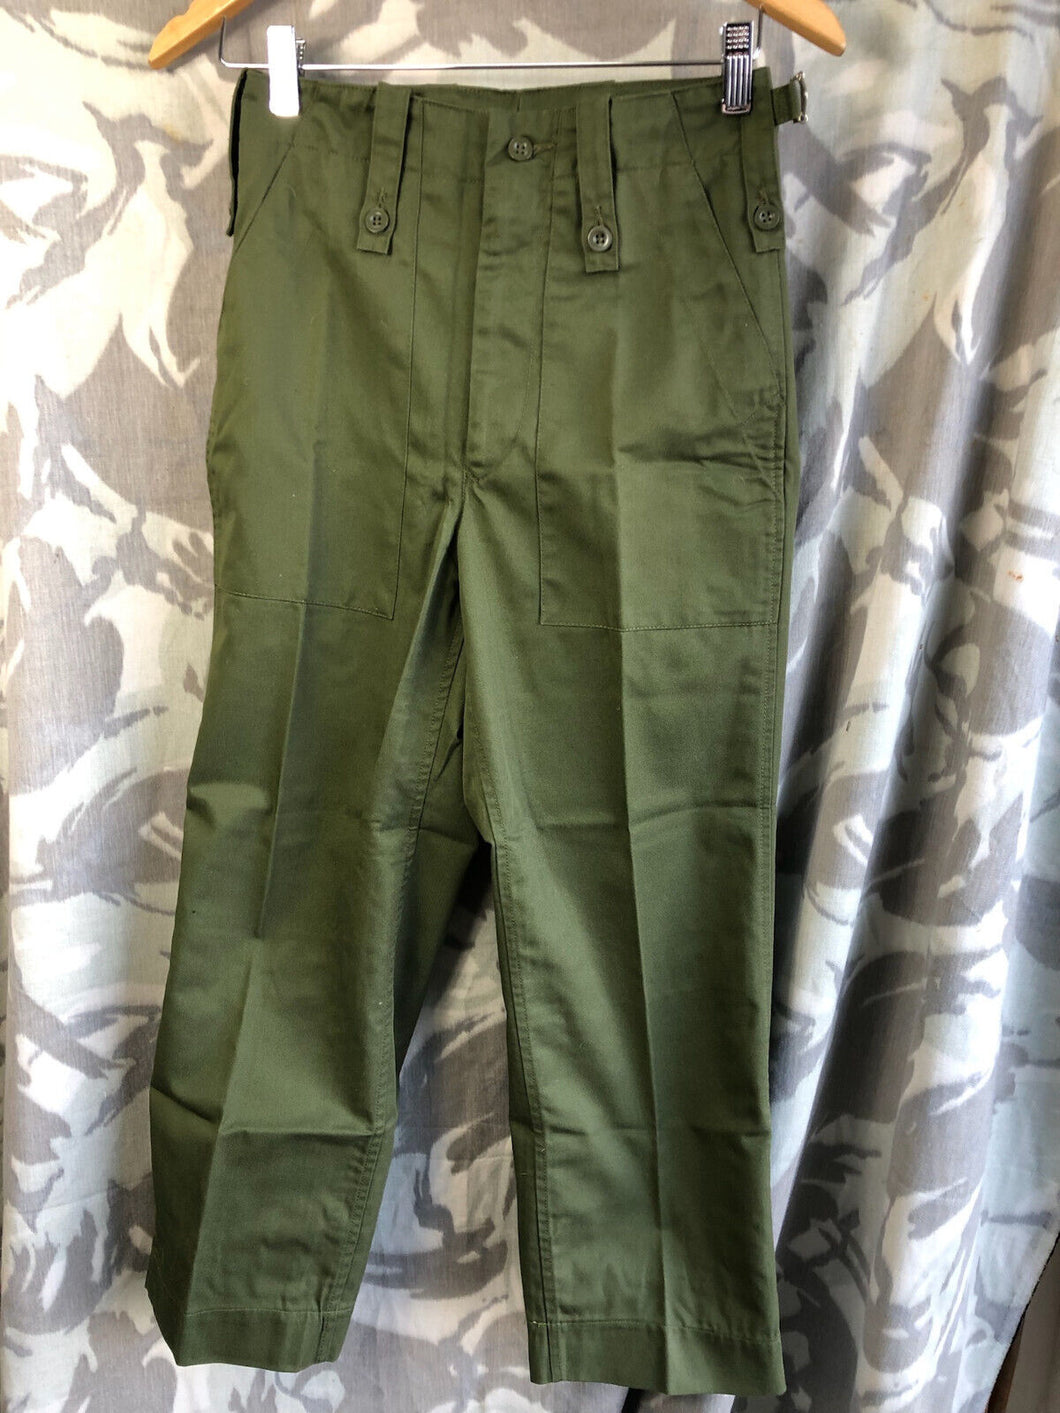 Genuine British Army OD Green Fatigue Combat Trousers - Size 69/68/80